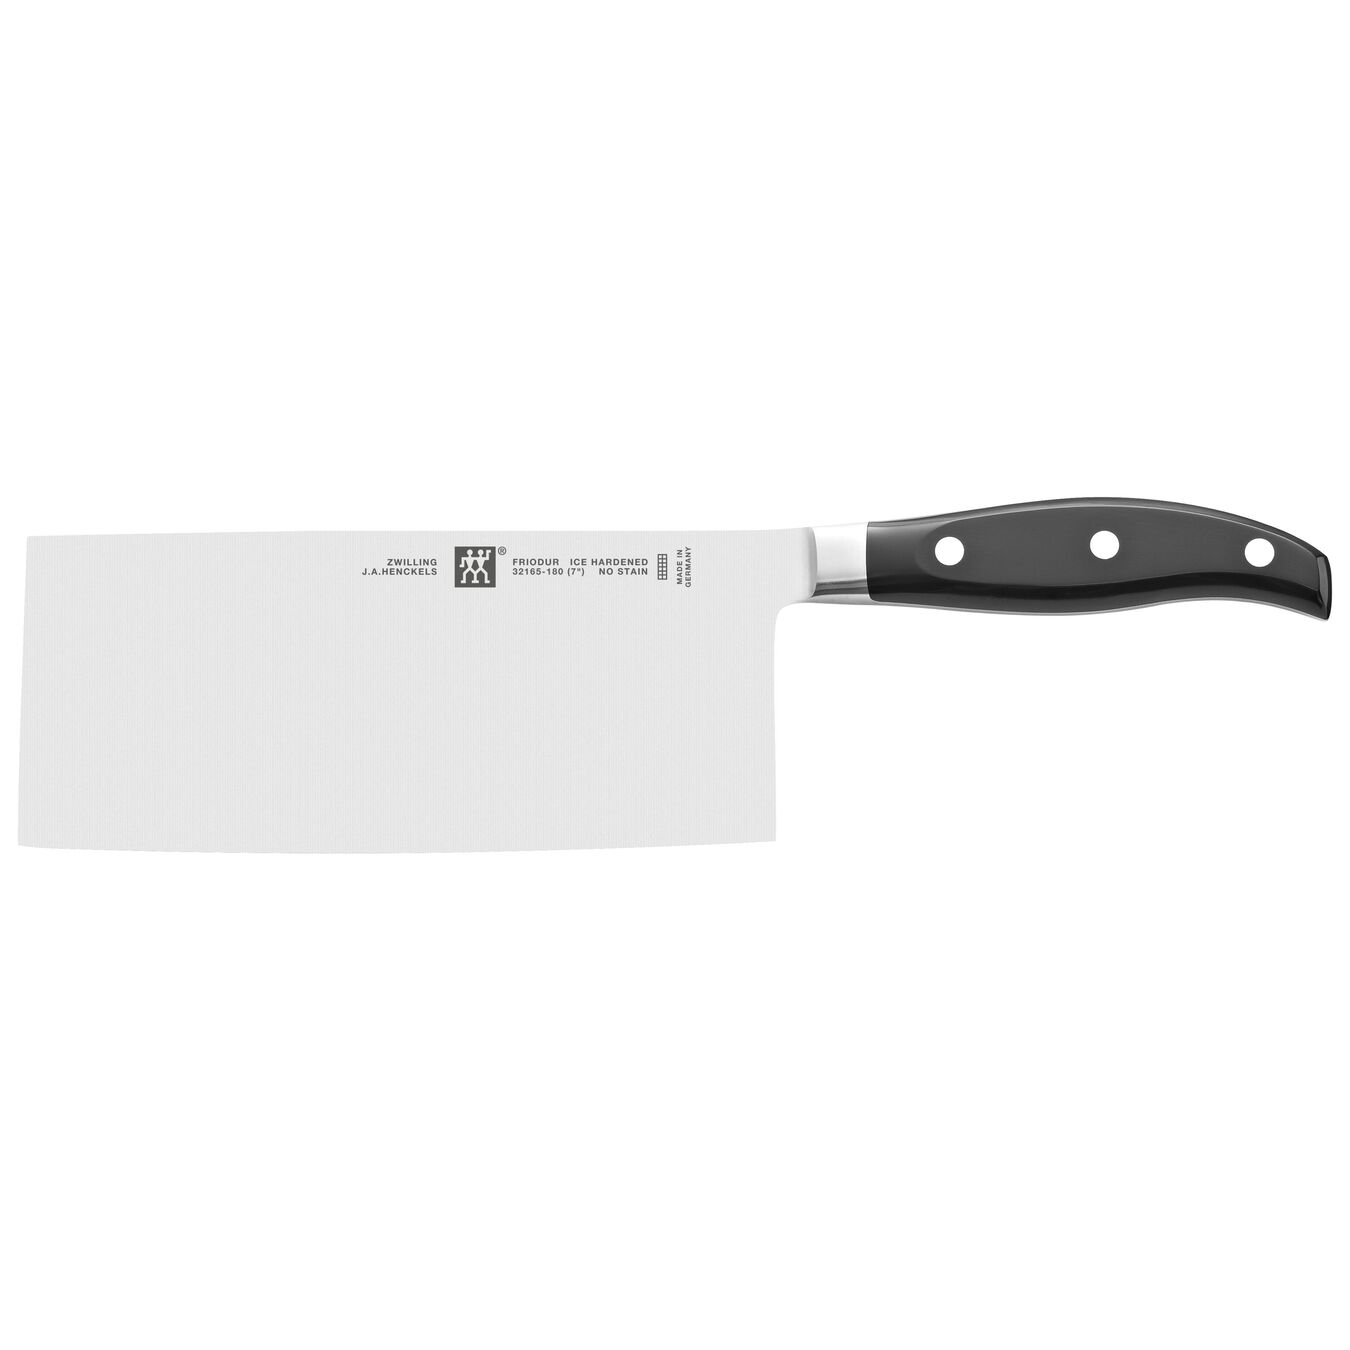 7 inch Chinese chef's knife - Visual Imperfections,,large 1